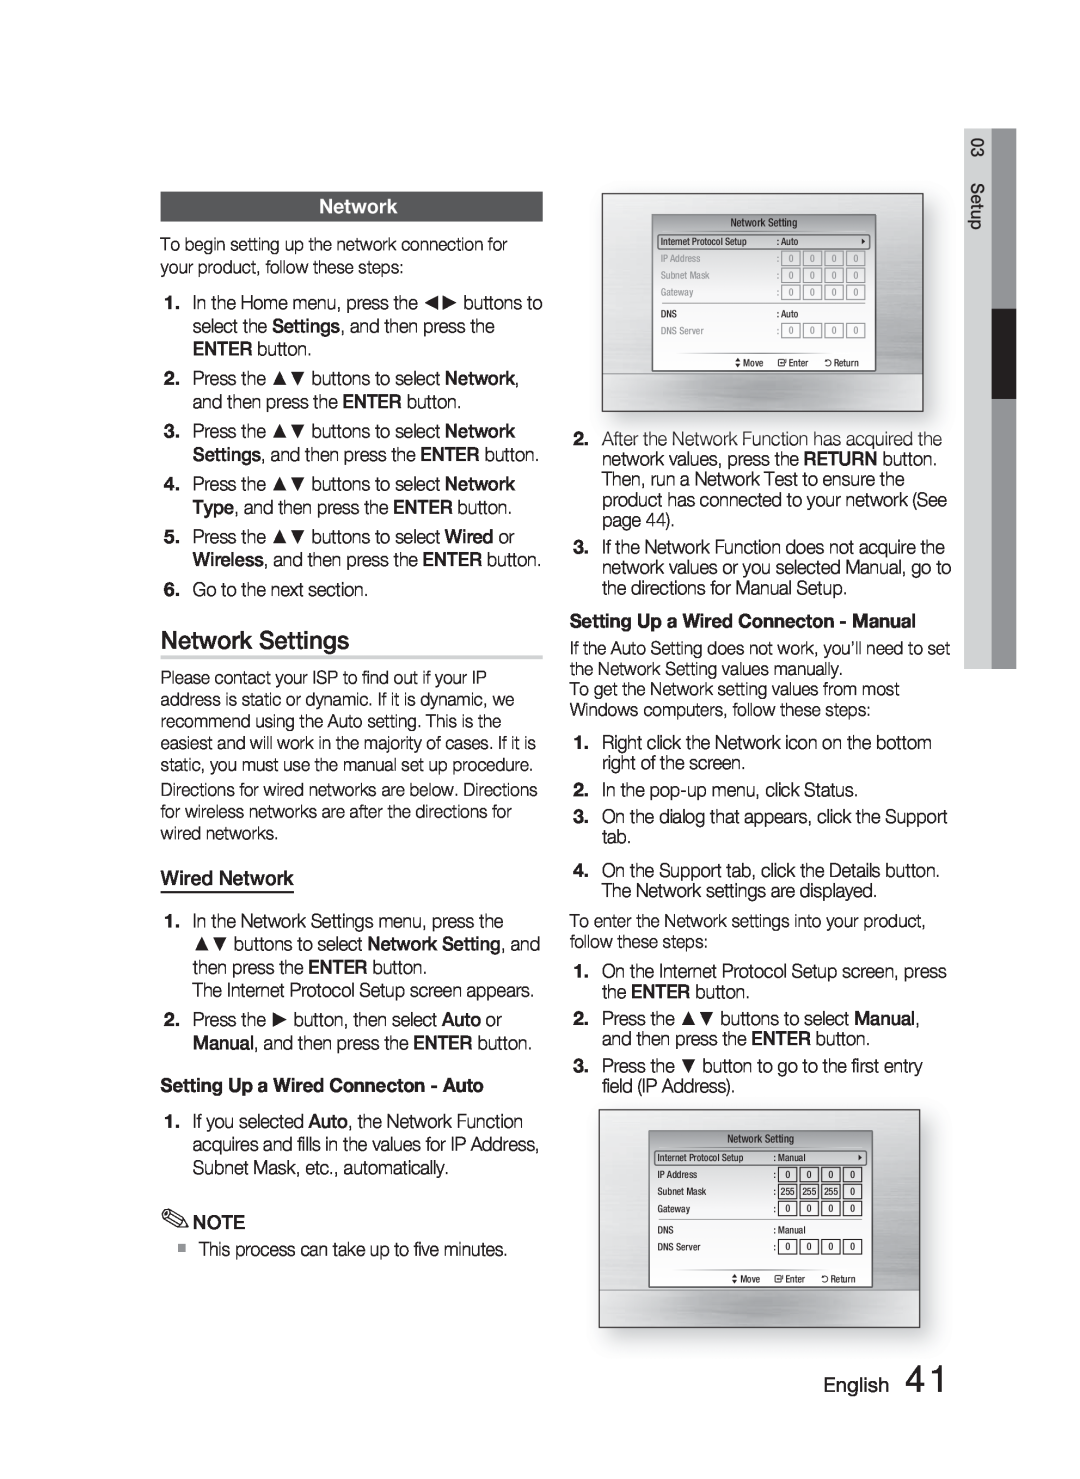 Samsung HT-C6900W user manual Network Settings, Wired Network, English 